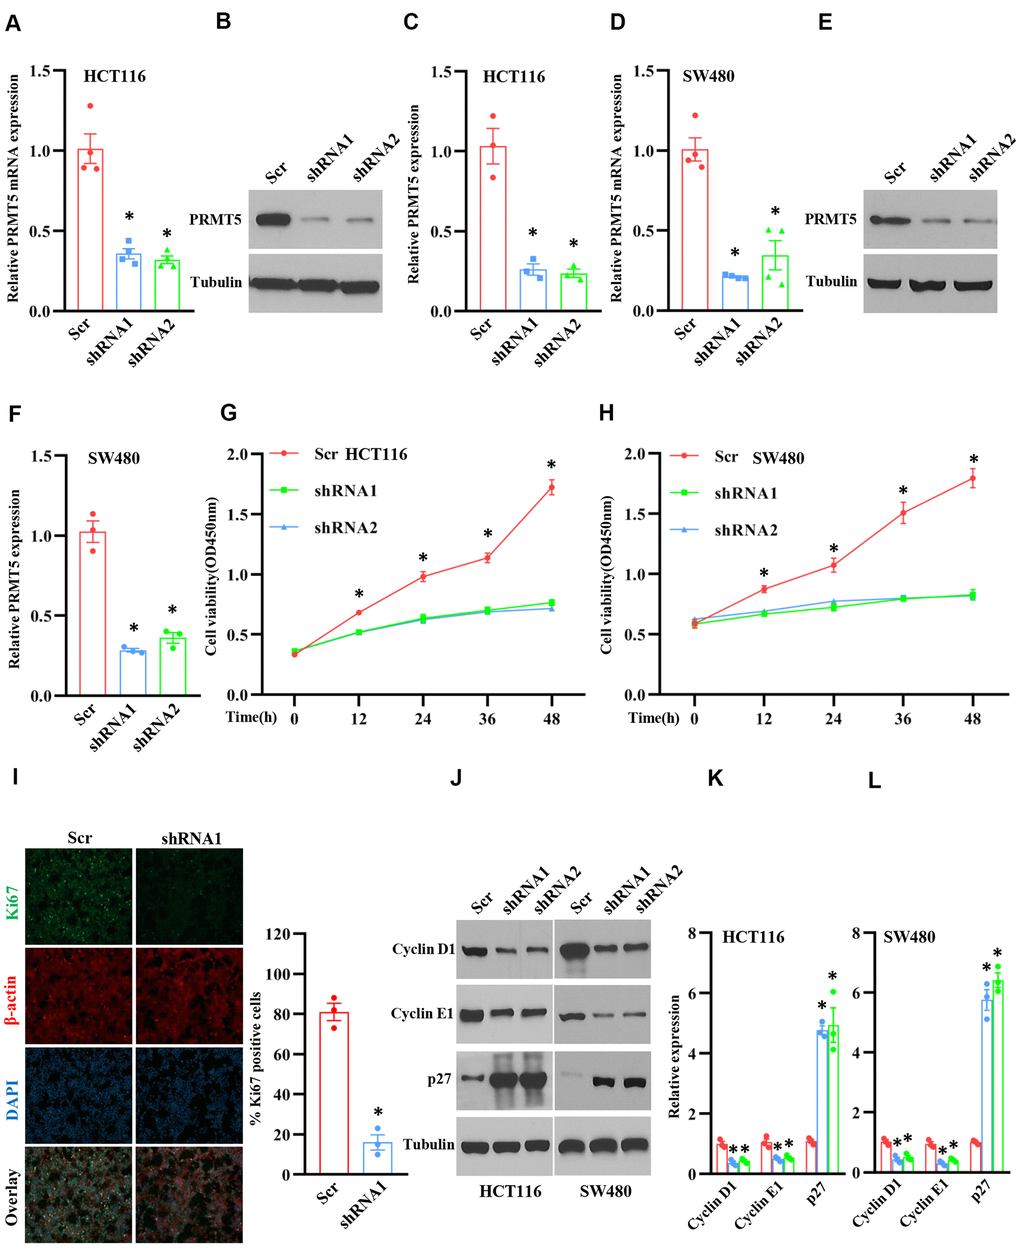 Silencing PRMT5 prevents cell proliferation and cell cycle progression. HCT116 and SW480 cells are transduced by lentivirus containing Scramble and PRMT5-shRNAs. (A) qRT-PCR analysis of PRMT5 mRNA expression level in HCT116 cells. *P B) PRMT5 protein expression level is detected by Western blotting in HCT116 cells. Representative data is shown. (C) PRMT5 protein expression level is quantified in HCT116 cells. *P D) qRT-PCR analysis of PRMT5 mRNA expression level in SW480 cells. * P E) PRMT5 protein expression level is analyzed by Western blotting in SW480 cells. (F) PRMT5 protein expression level is quantified in SW480 cells. *P G, H) Cell viability is measured during different time points in HCT116 and SW480 cells (n=4). *P I) Immunostaining of ki67, a cell proliferation marker, in HCT116 cells. Representative pictures were shown. Scale bar = 50μm. The Ki67 positive cells were quantified in the indicated groups. For each group, 1000 cells were counted. n=3, *P J) Western blot analysis of cyclin D1, cyclin E1, and p27 protein expression level in HCT116 and SW480 cells. Representative data is shown. (K, L) Indicated proteins are quantified in HCT116 and SW480 cells. *P 